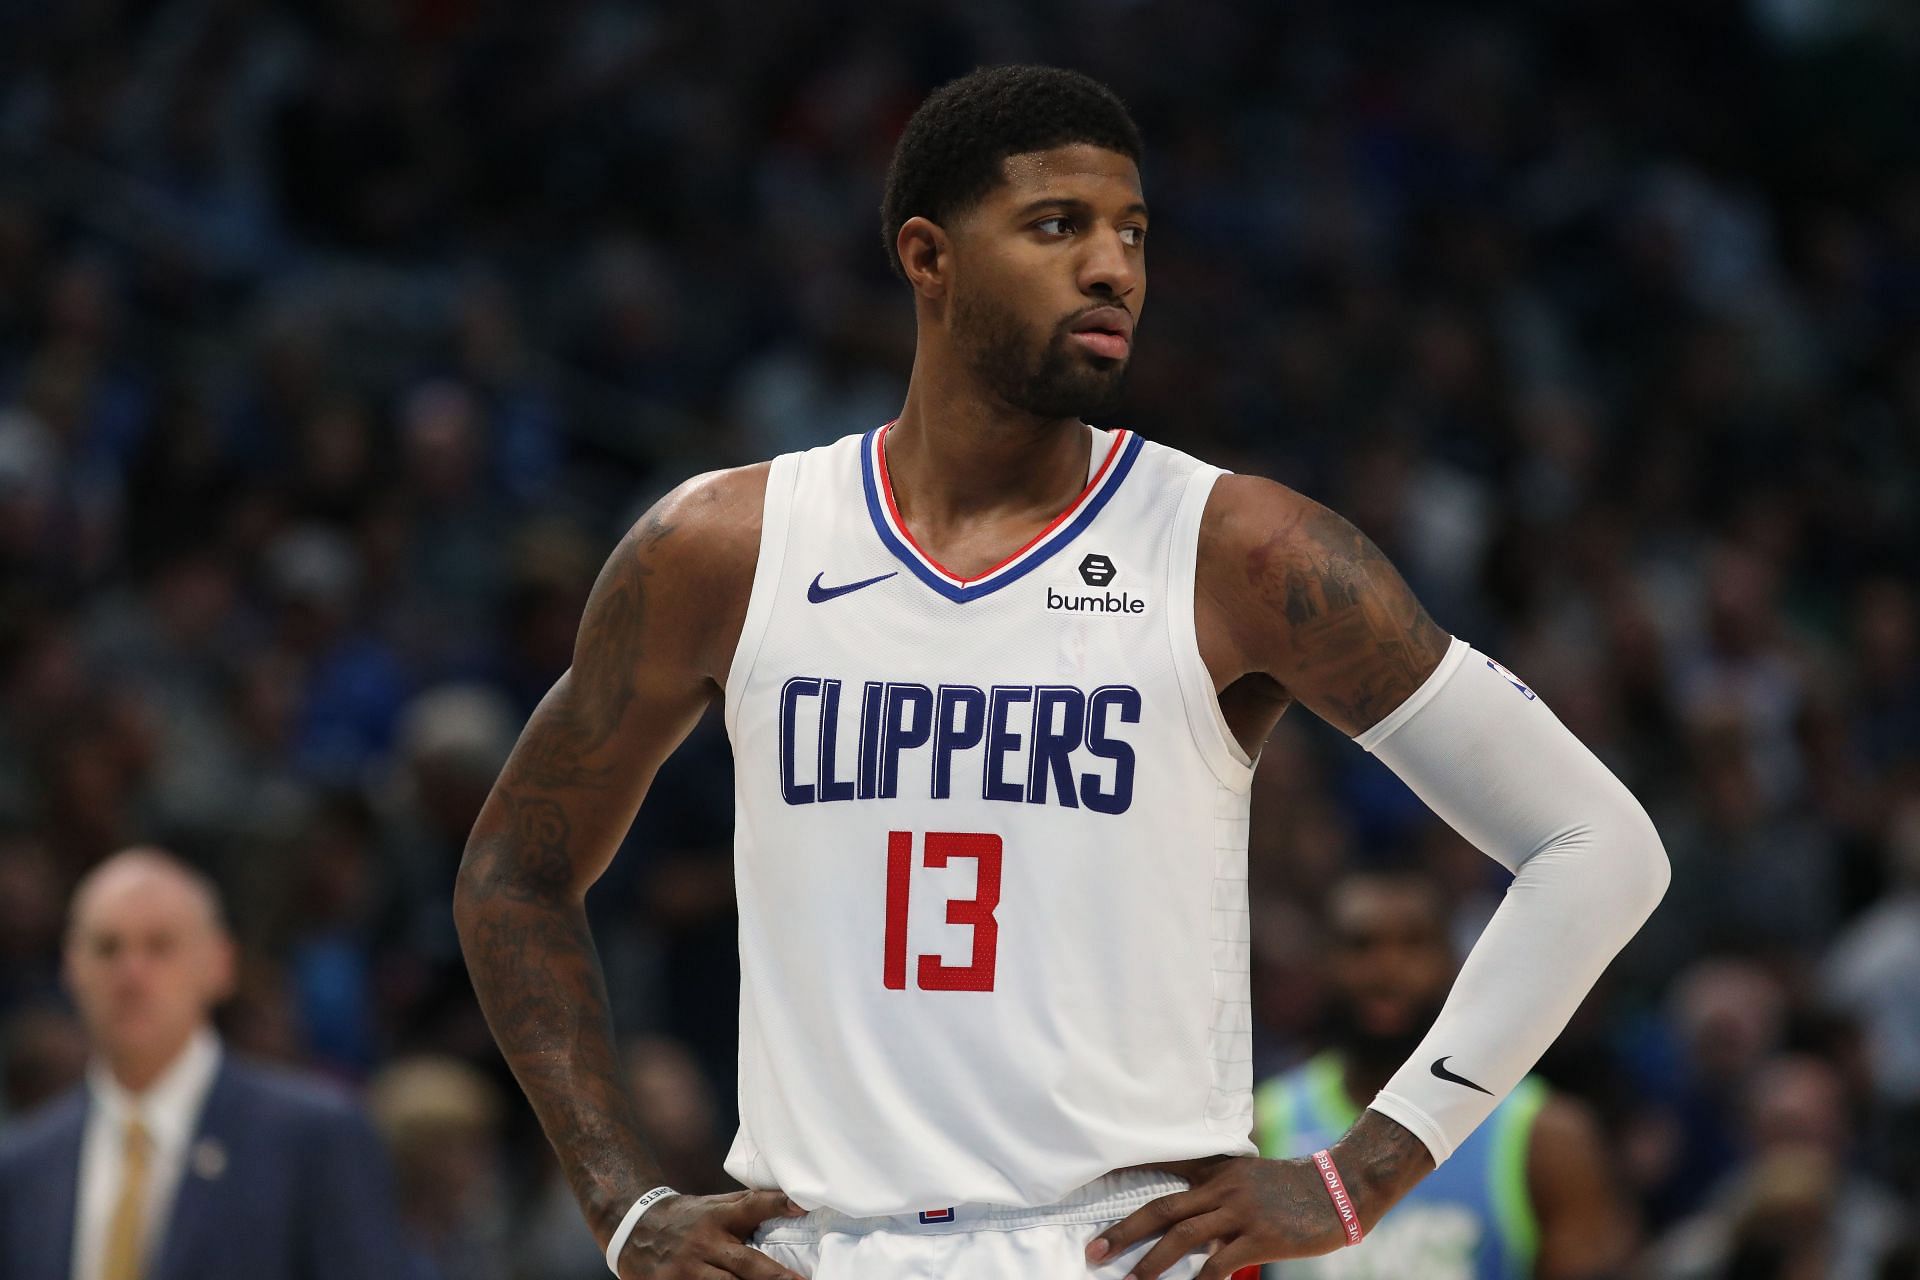 Paul George of the Los Angeles Clippers.